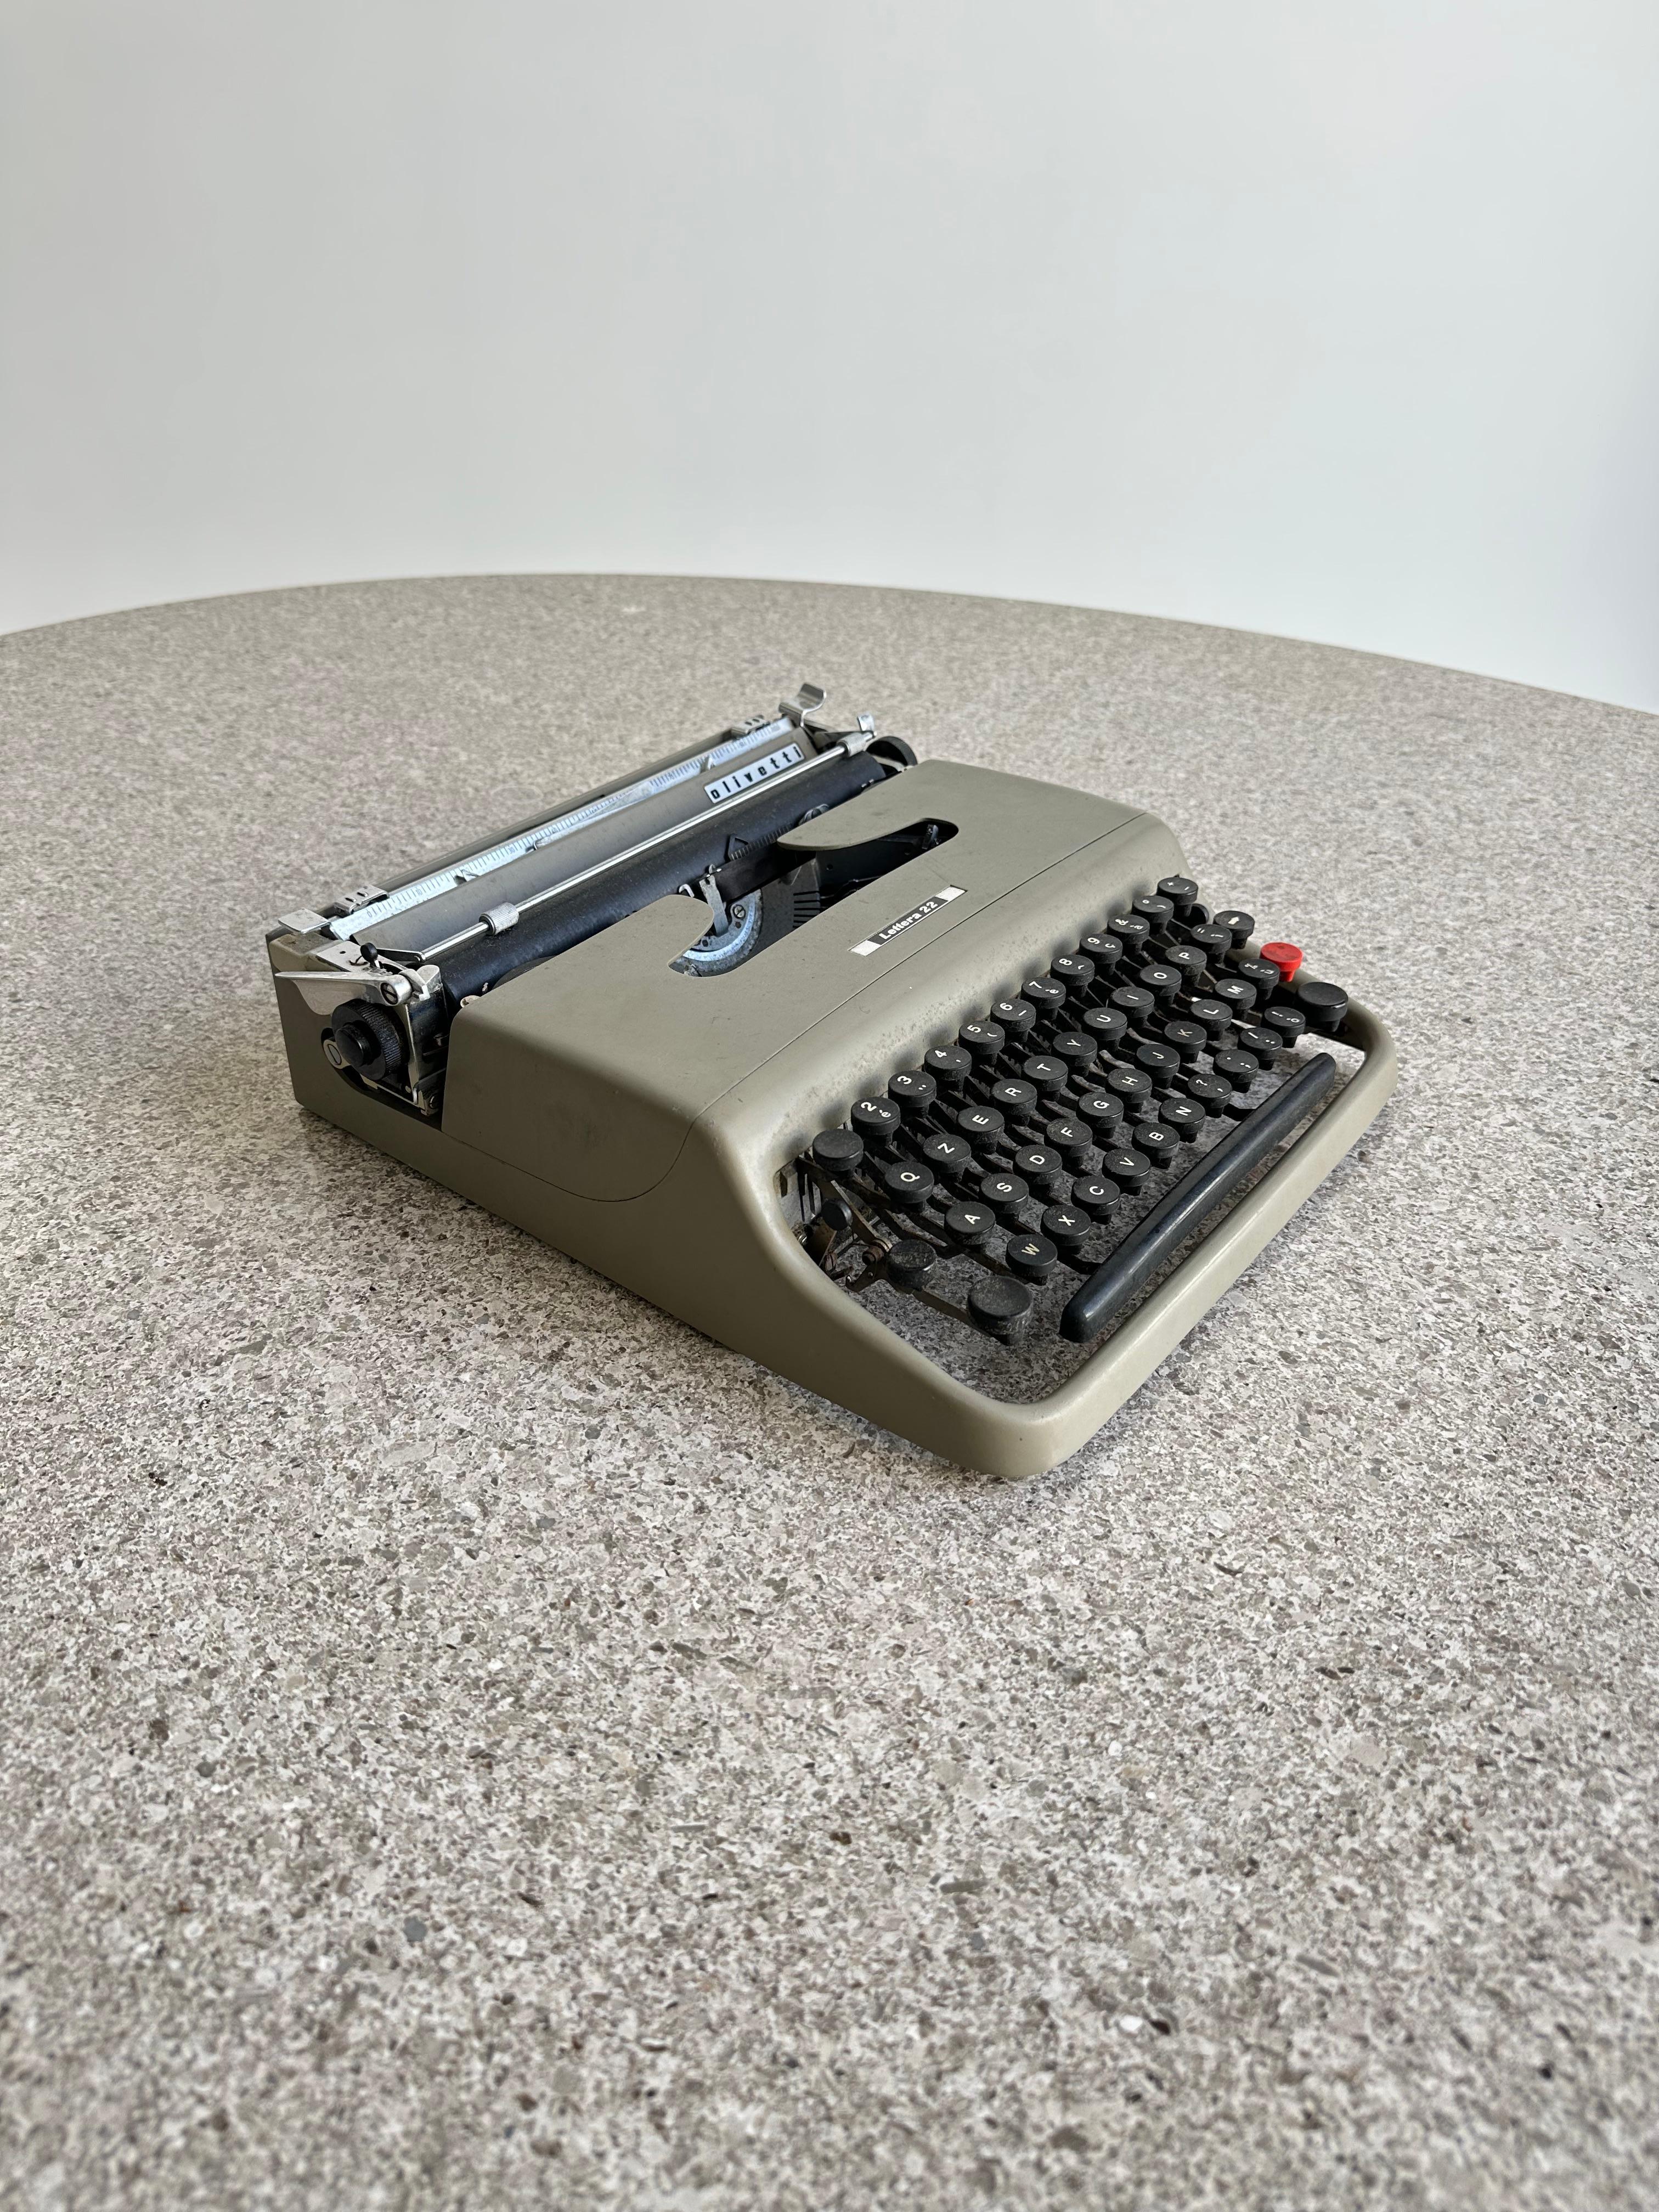 Lettera 22 portable typewriter, of enameled metal and plastic, designed by Marcello Nizzoli and produced by the progressive manufacturer Olivetti in Italy, circa 1954. Nizzoli (1887-1969), a painter, graphic artist, and architect was Olivetti's